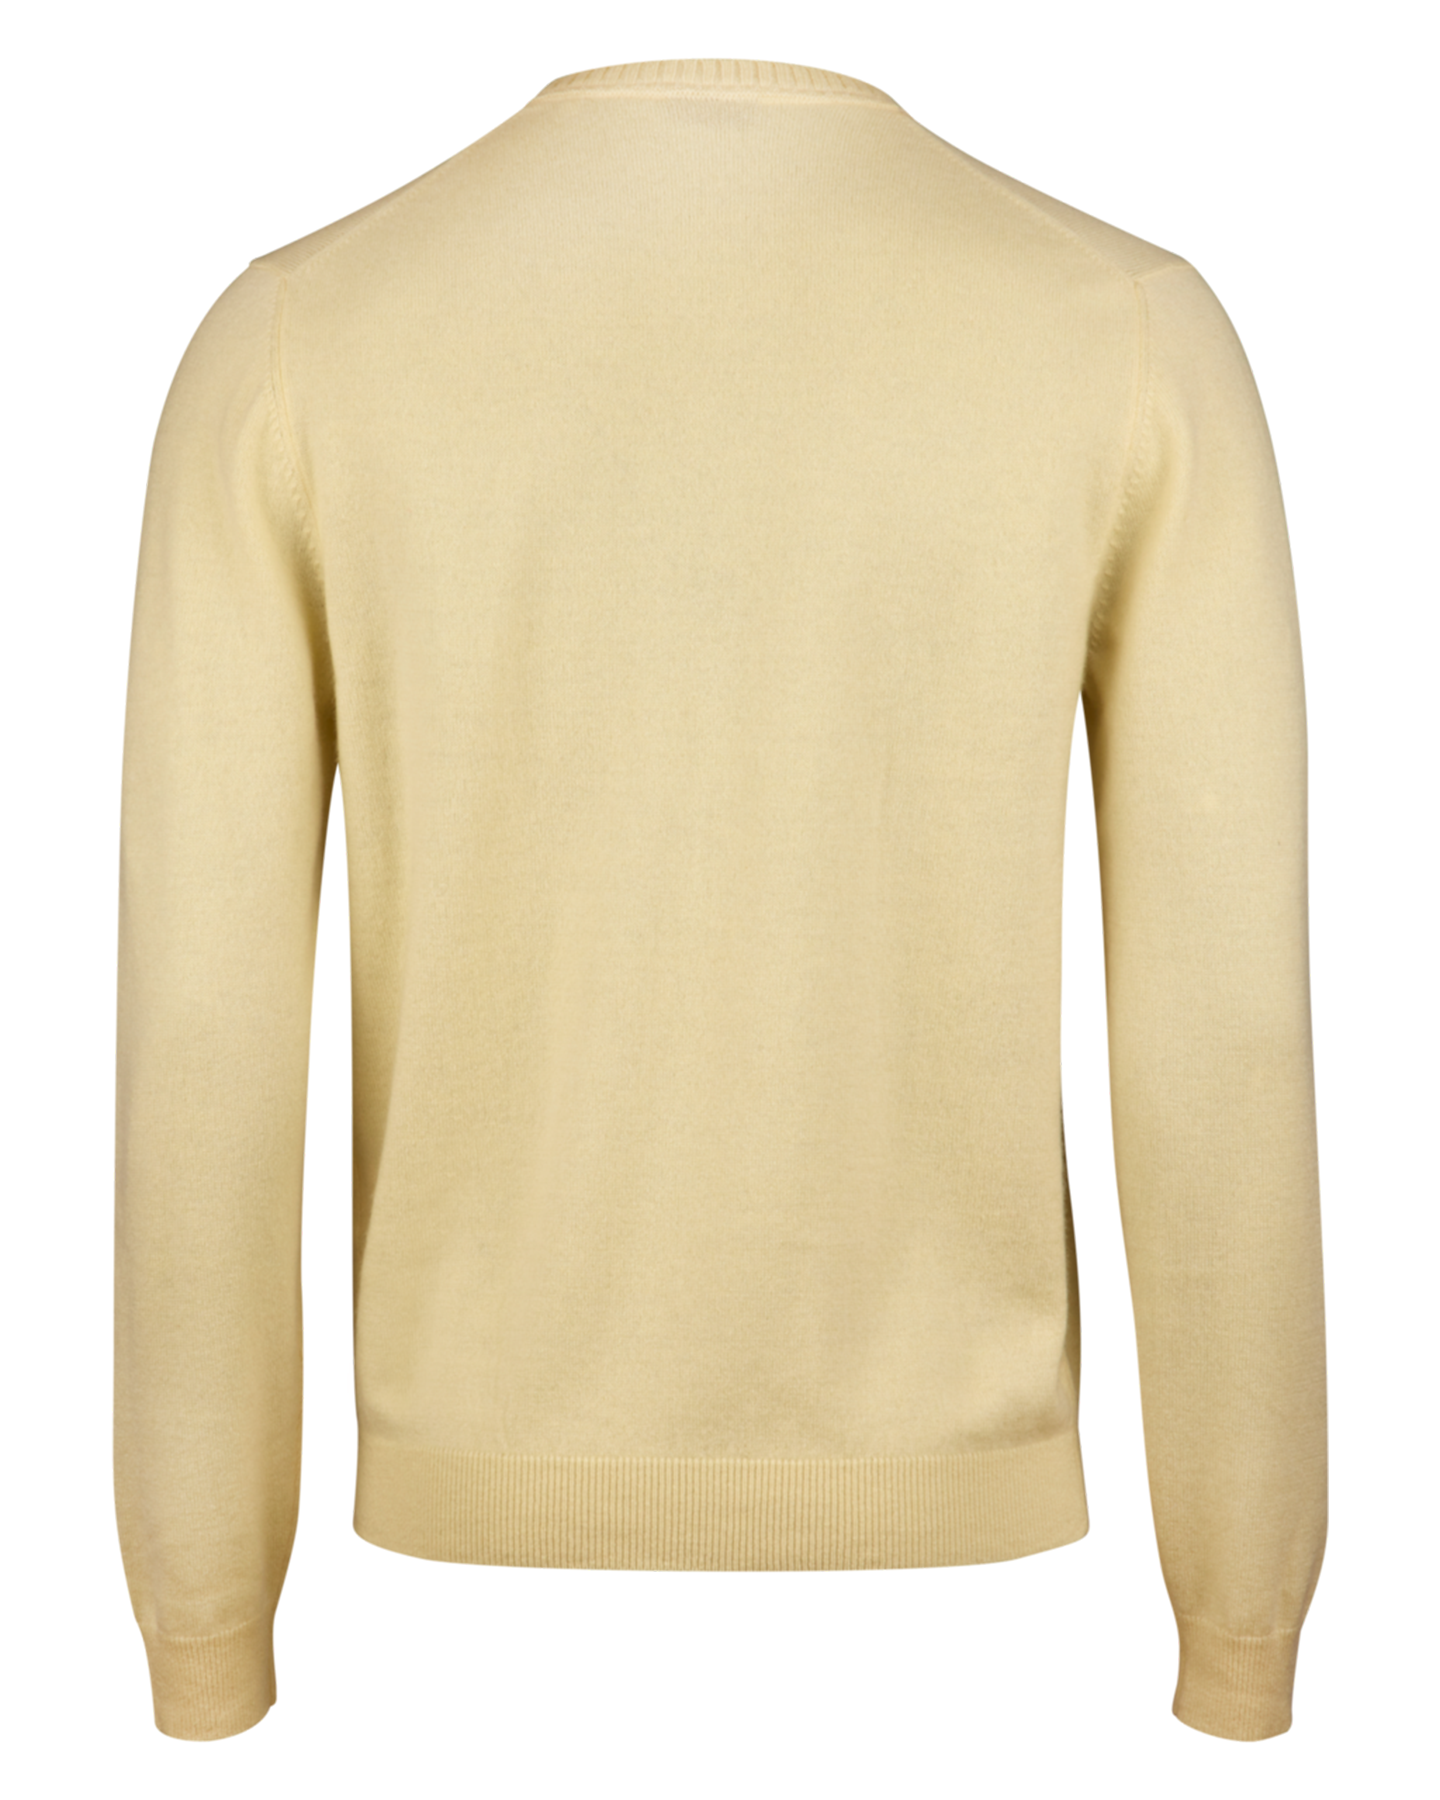 PALE YELLOW CASHMERE CREW NECK SWEATER